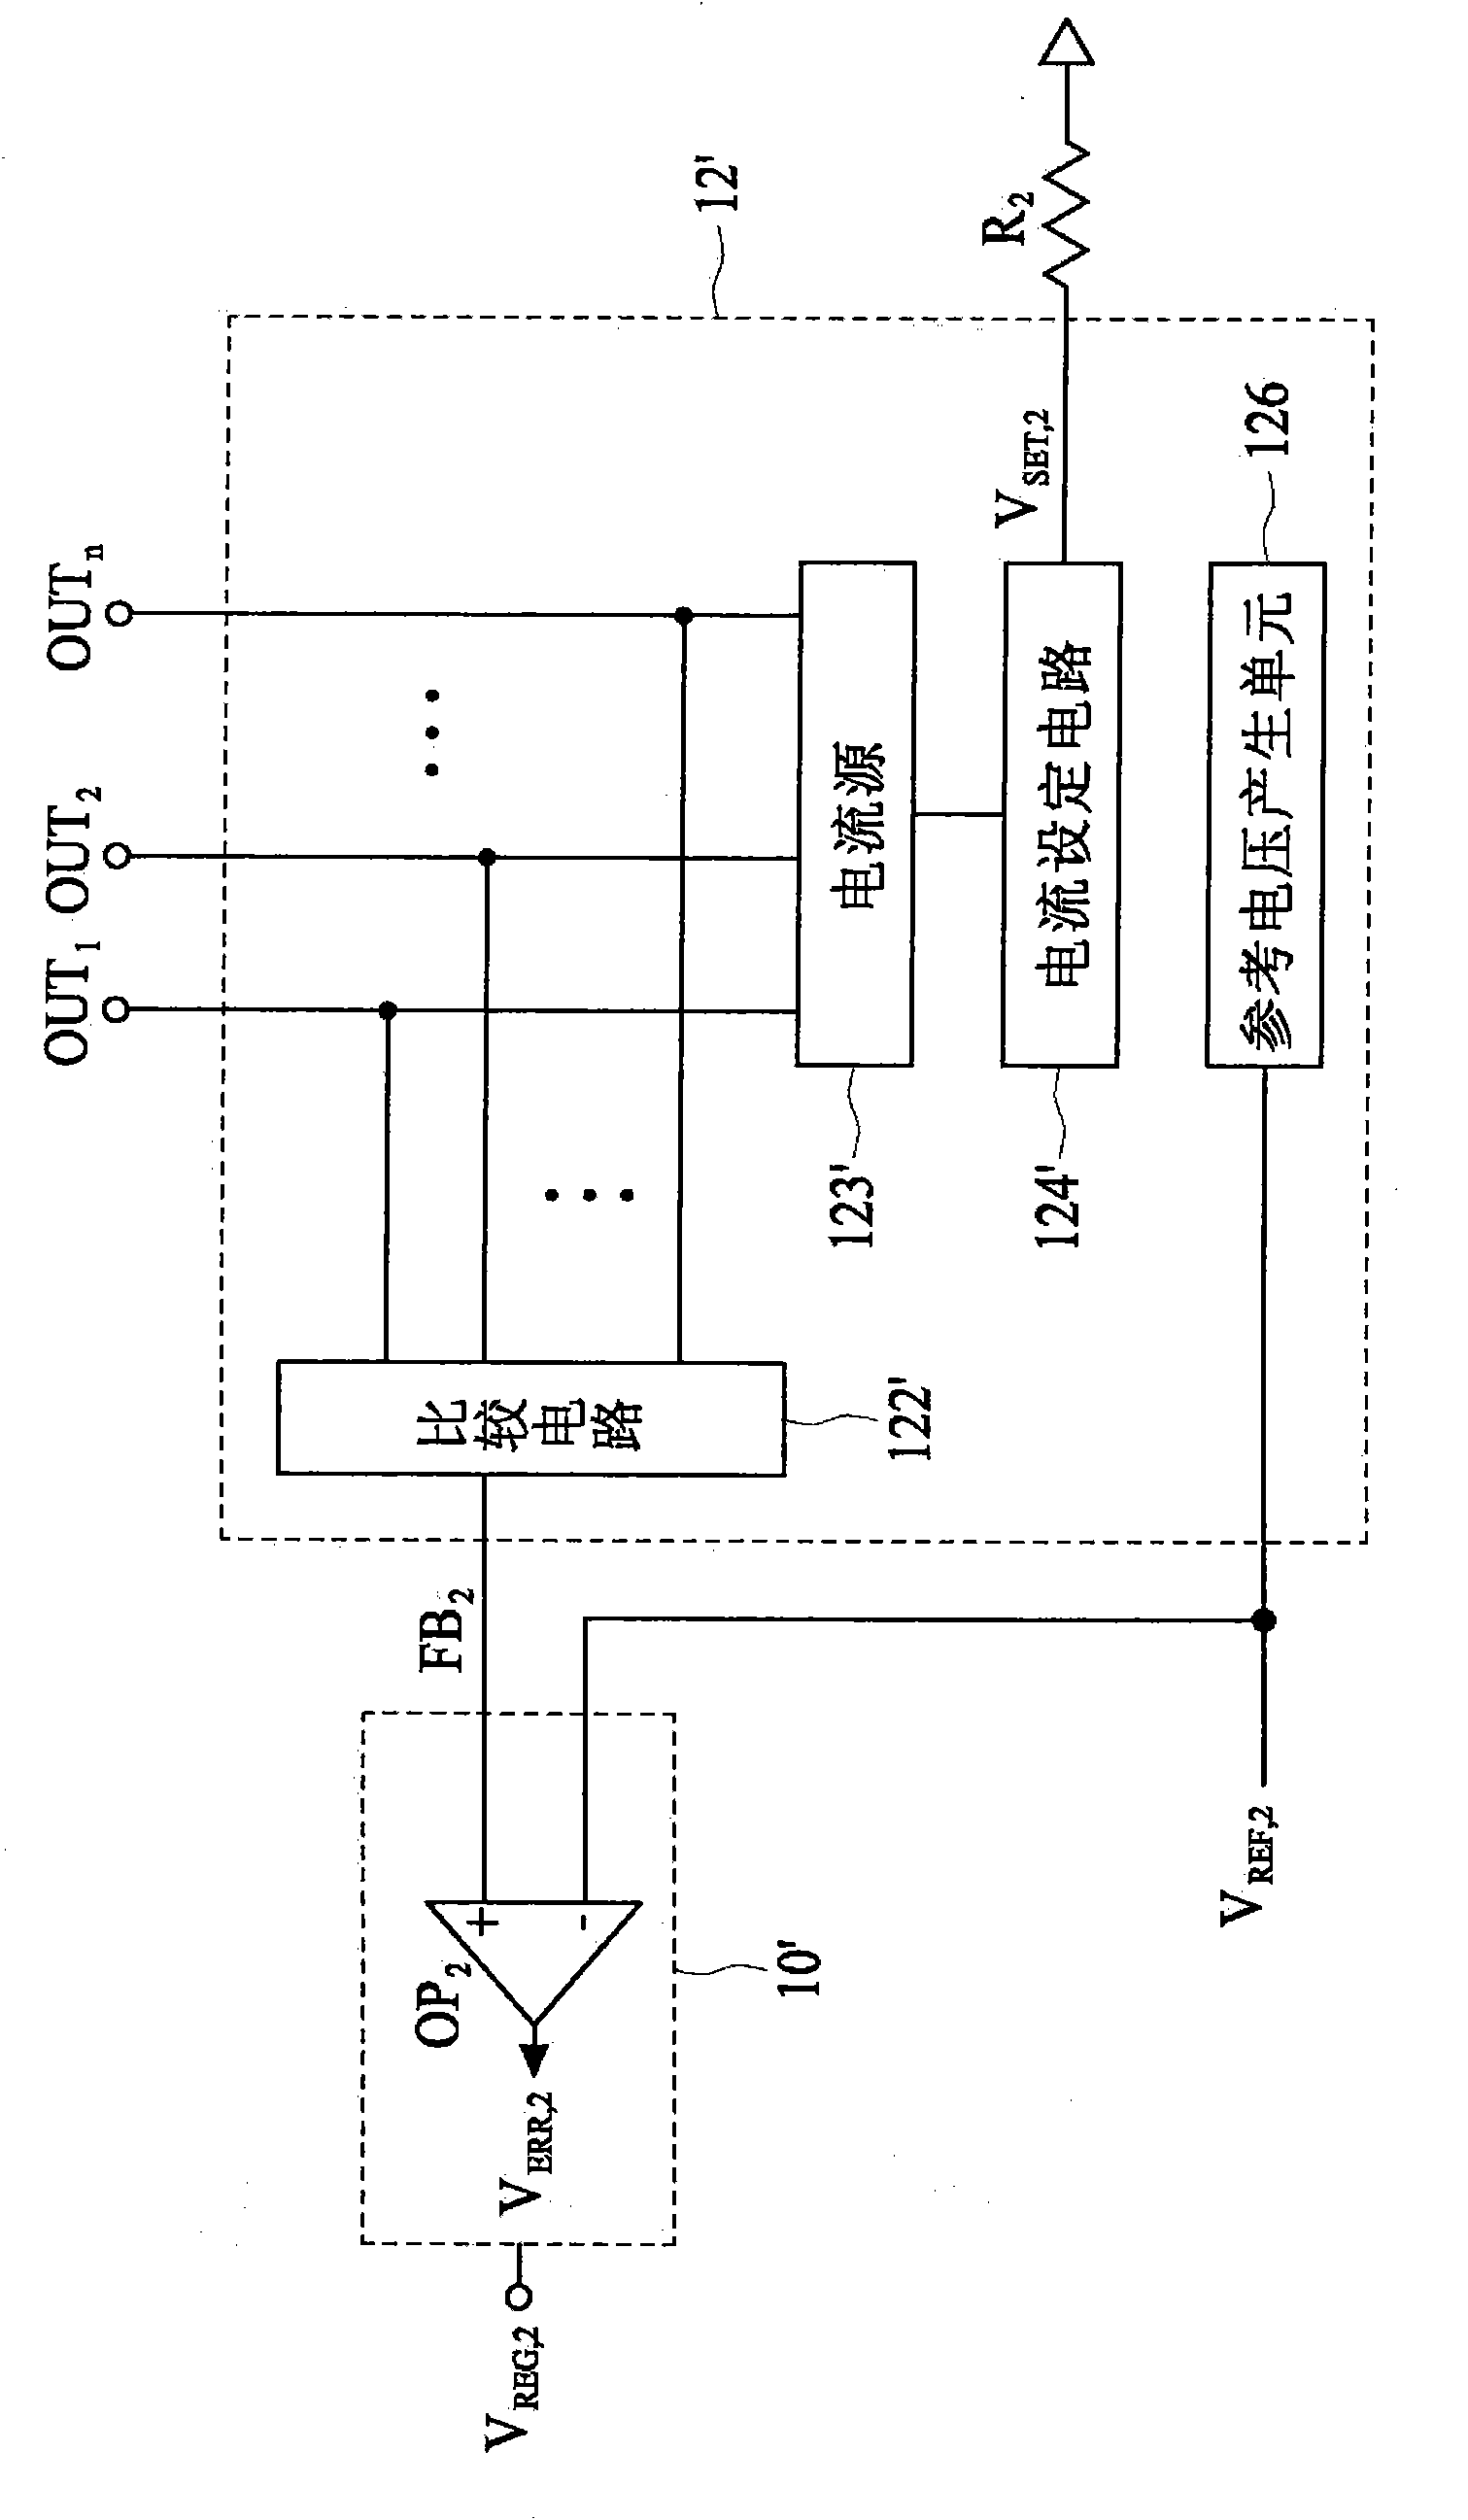 Light-emitting diode driving system and circuit thereof